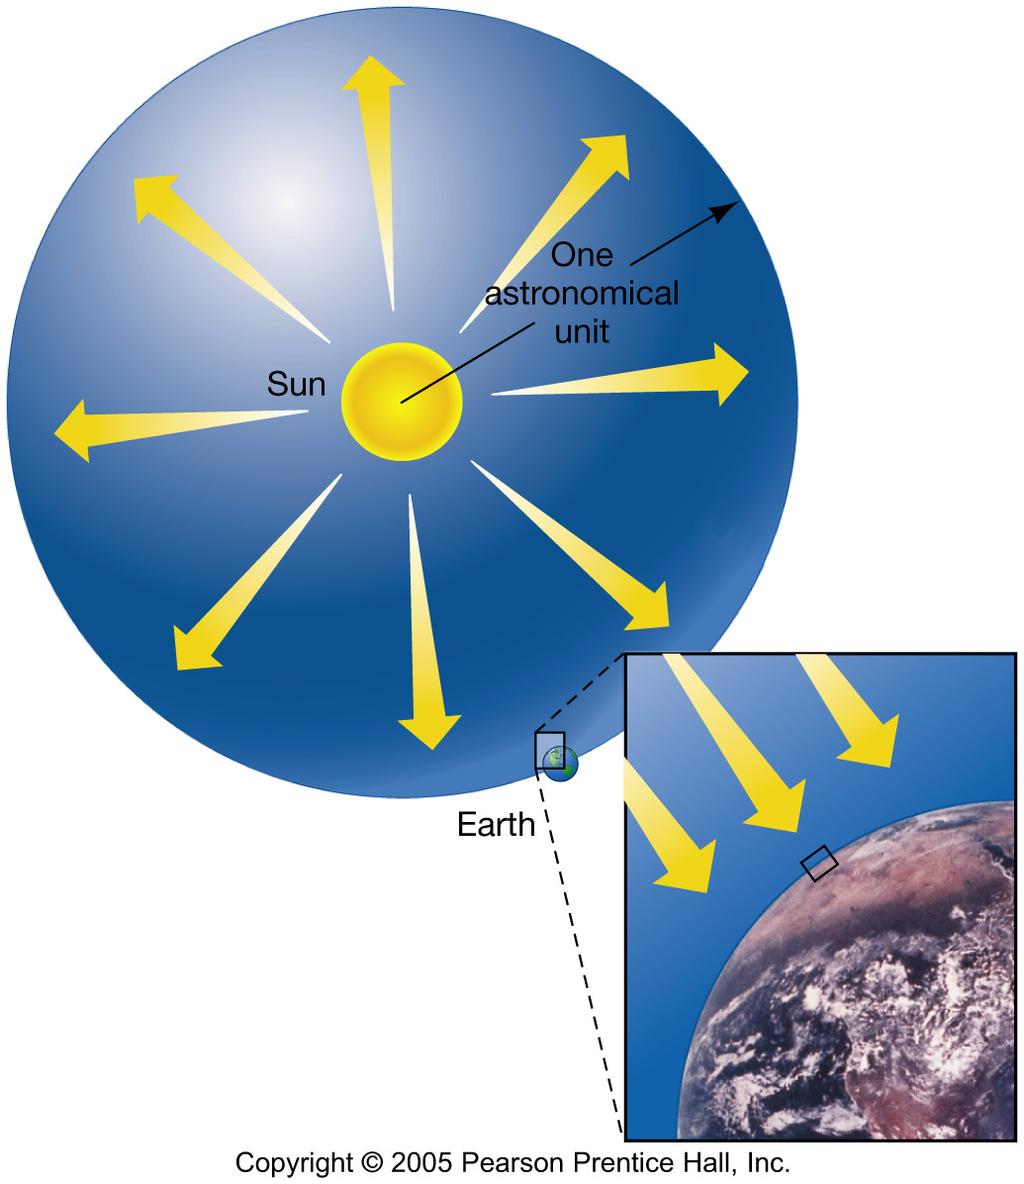 Determining Luminosity Measure k, the solar constant, the energy flux reaching the Earth Measure a, the distance